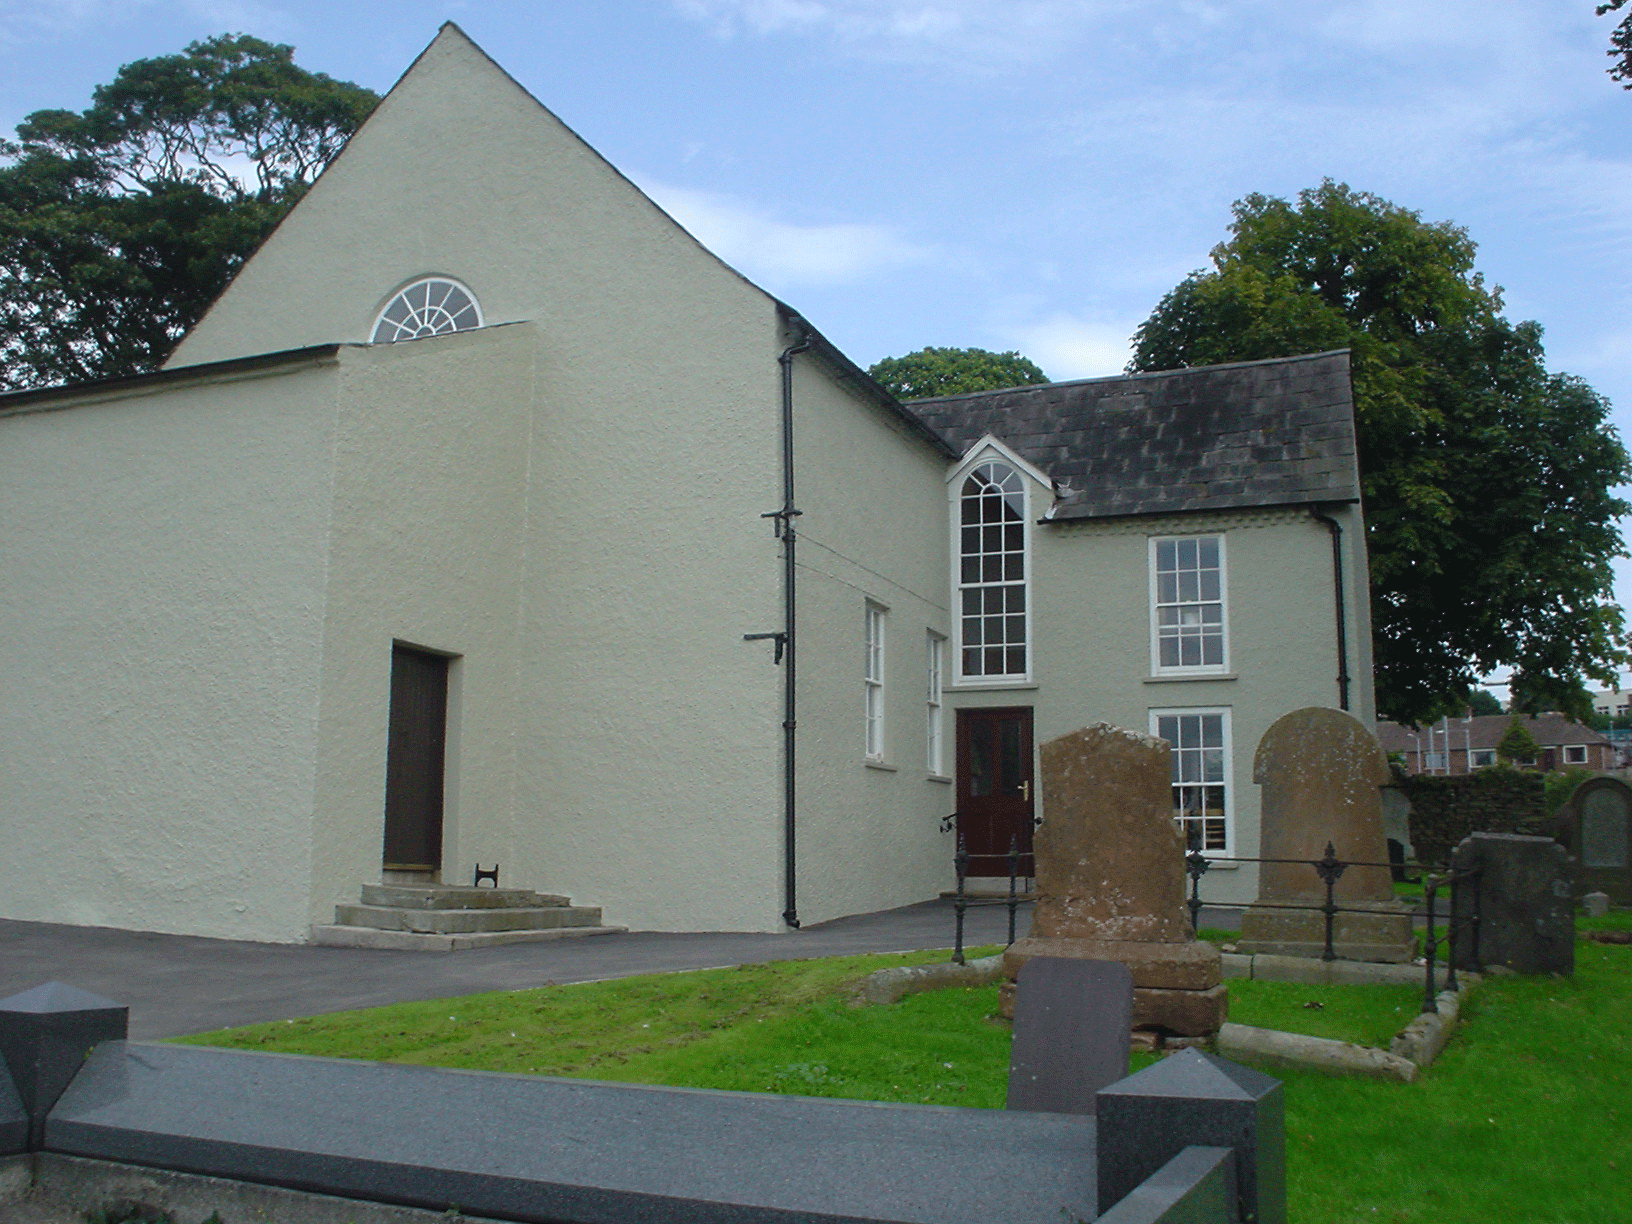 The View of the Downpatrick Church Building (Click to Enlarge)